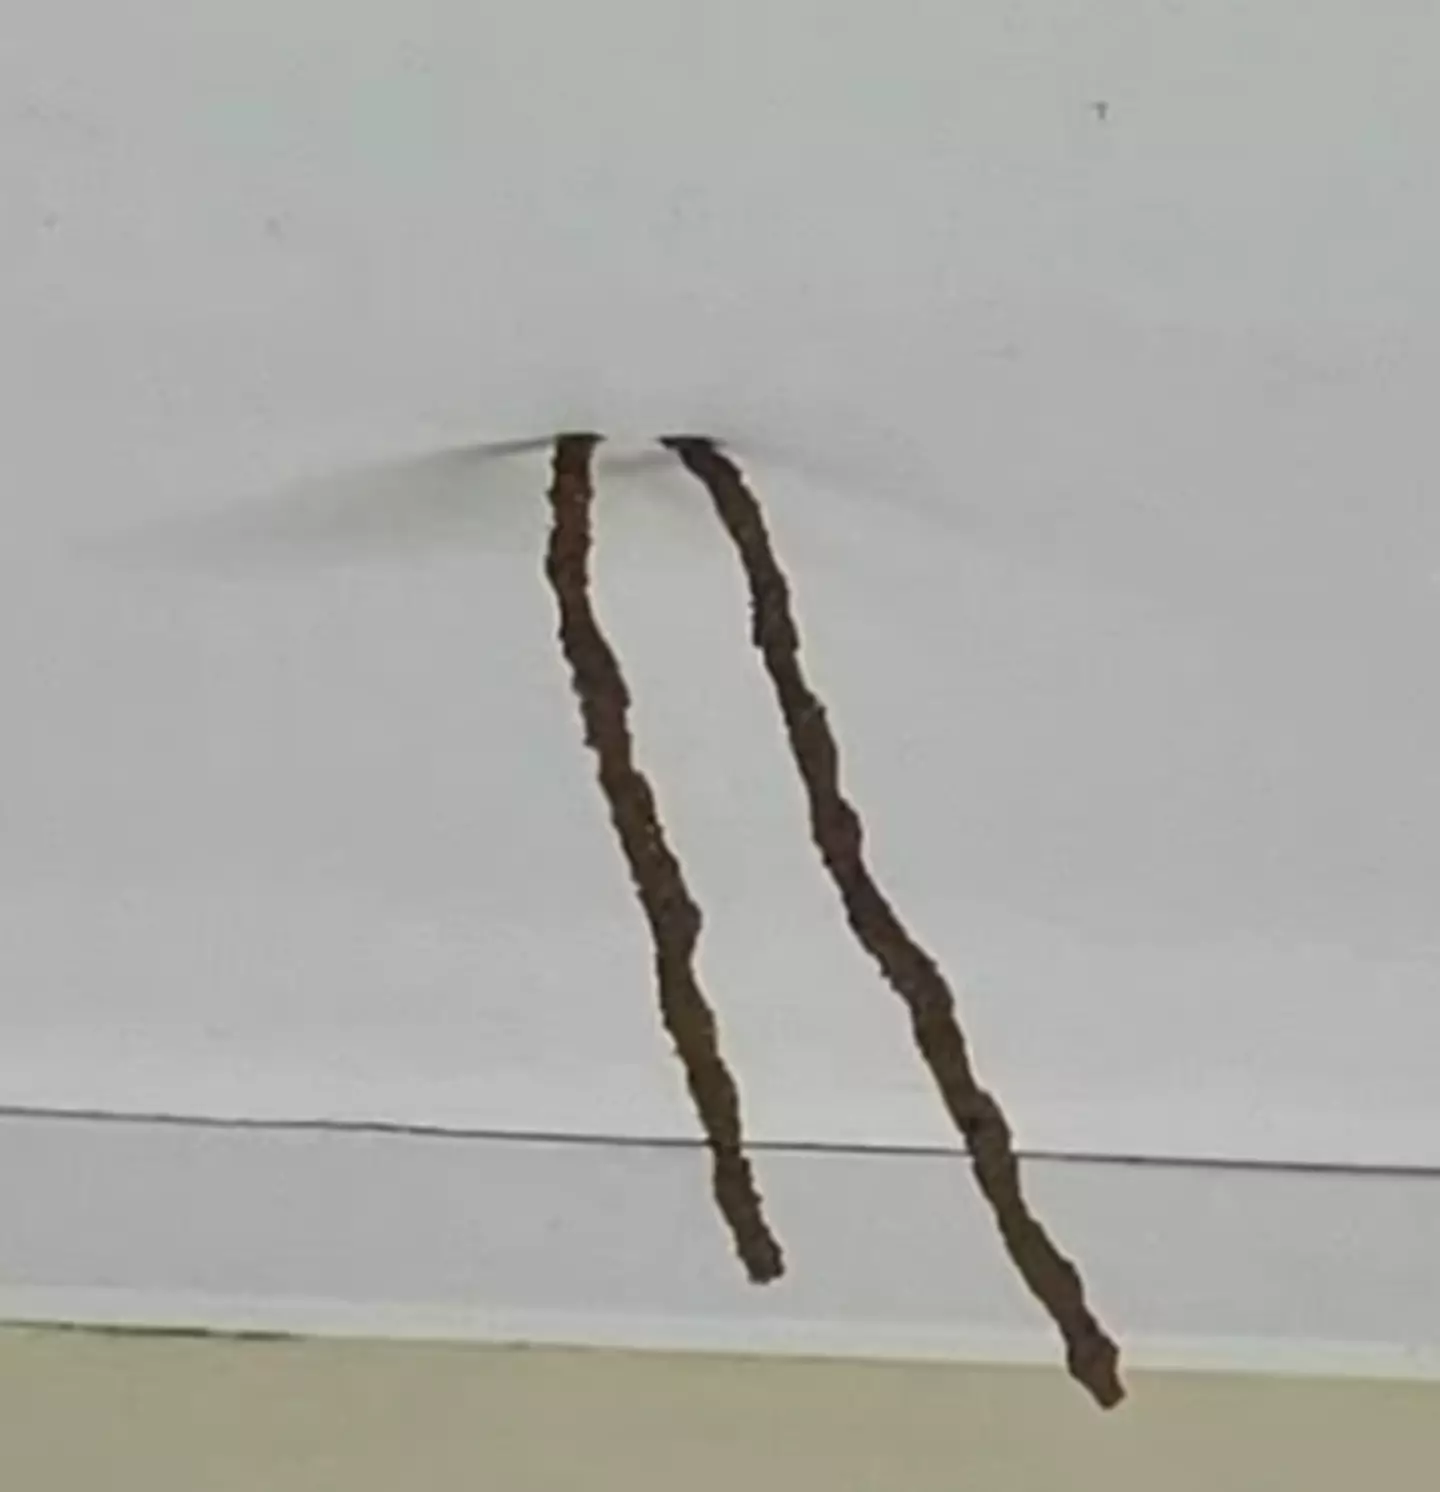 These mysterious looking twigs left one poor renter baffled.